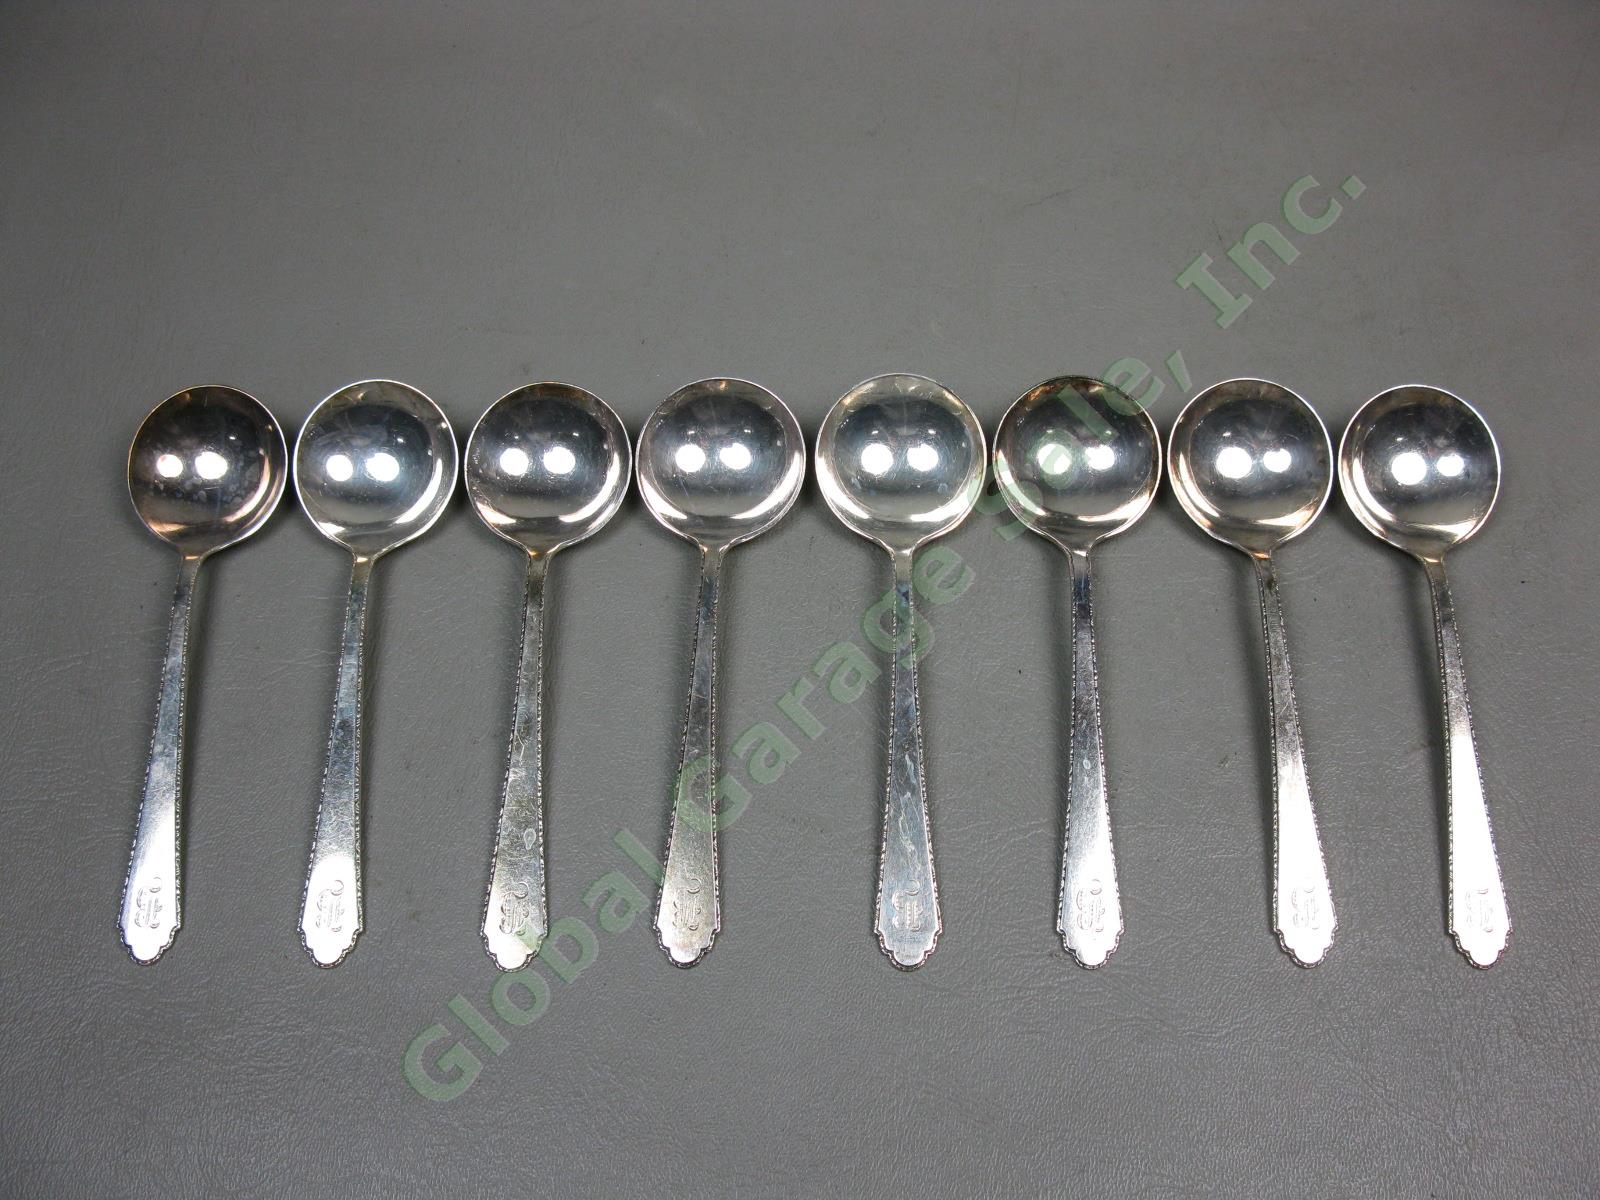 8 Rogers Lunt Bowlen Treasure William Mary Sterling Silver Soup Spoon Set 191.2g